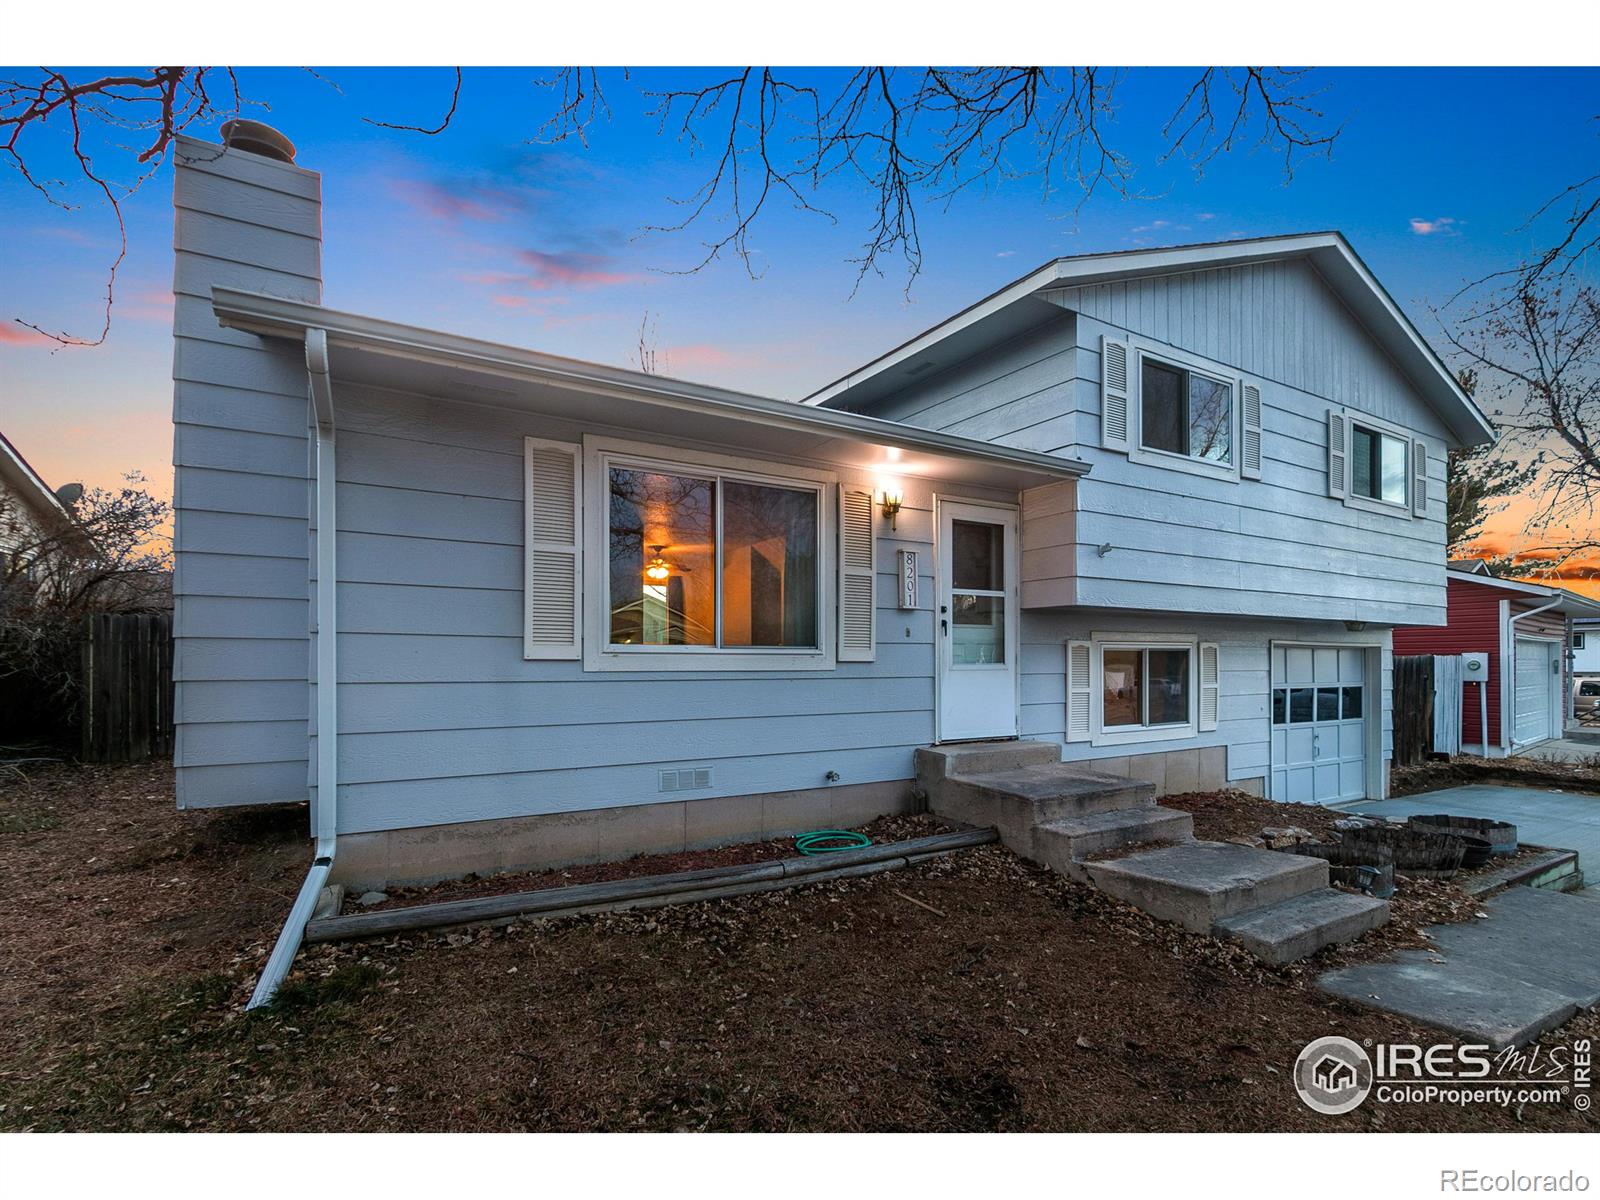 8201  otis court, Fort Collins sold home. Closed on 2024-03-25 for $375,000.